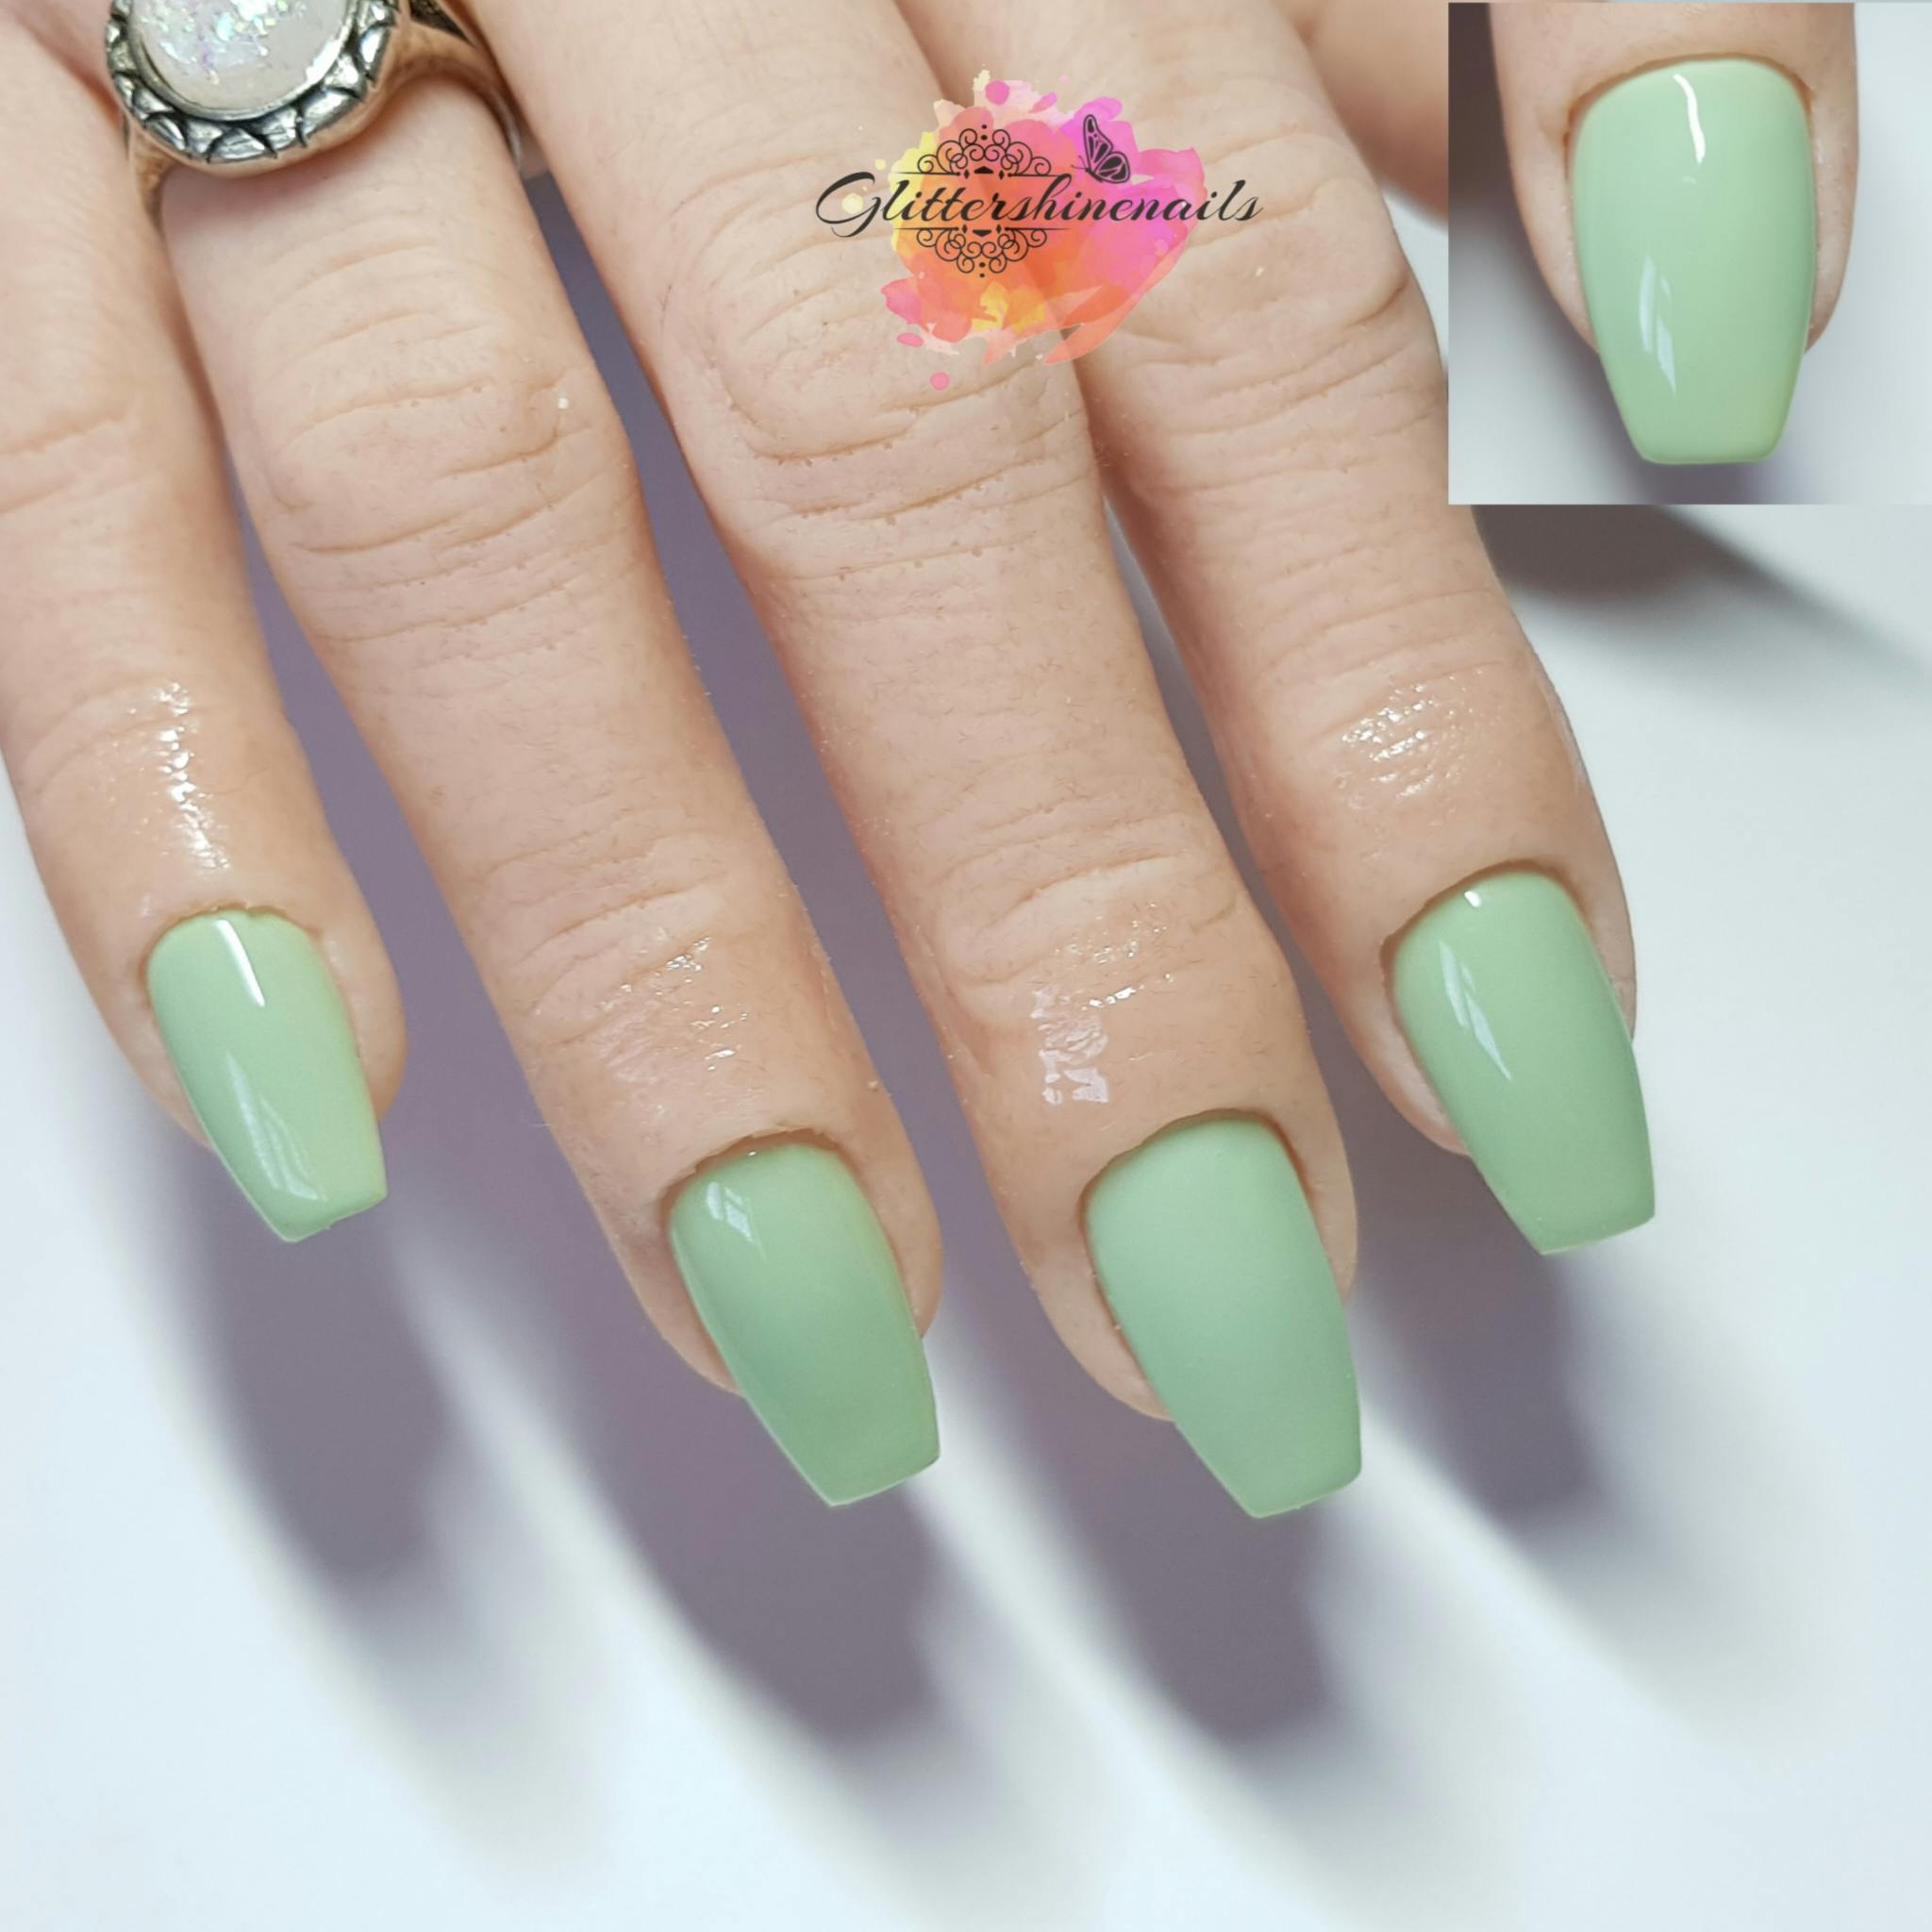 20 Sage Green Nails You'll Want to Copy for Spring! — Champagne & Savings